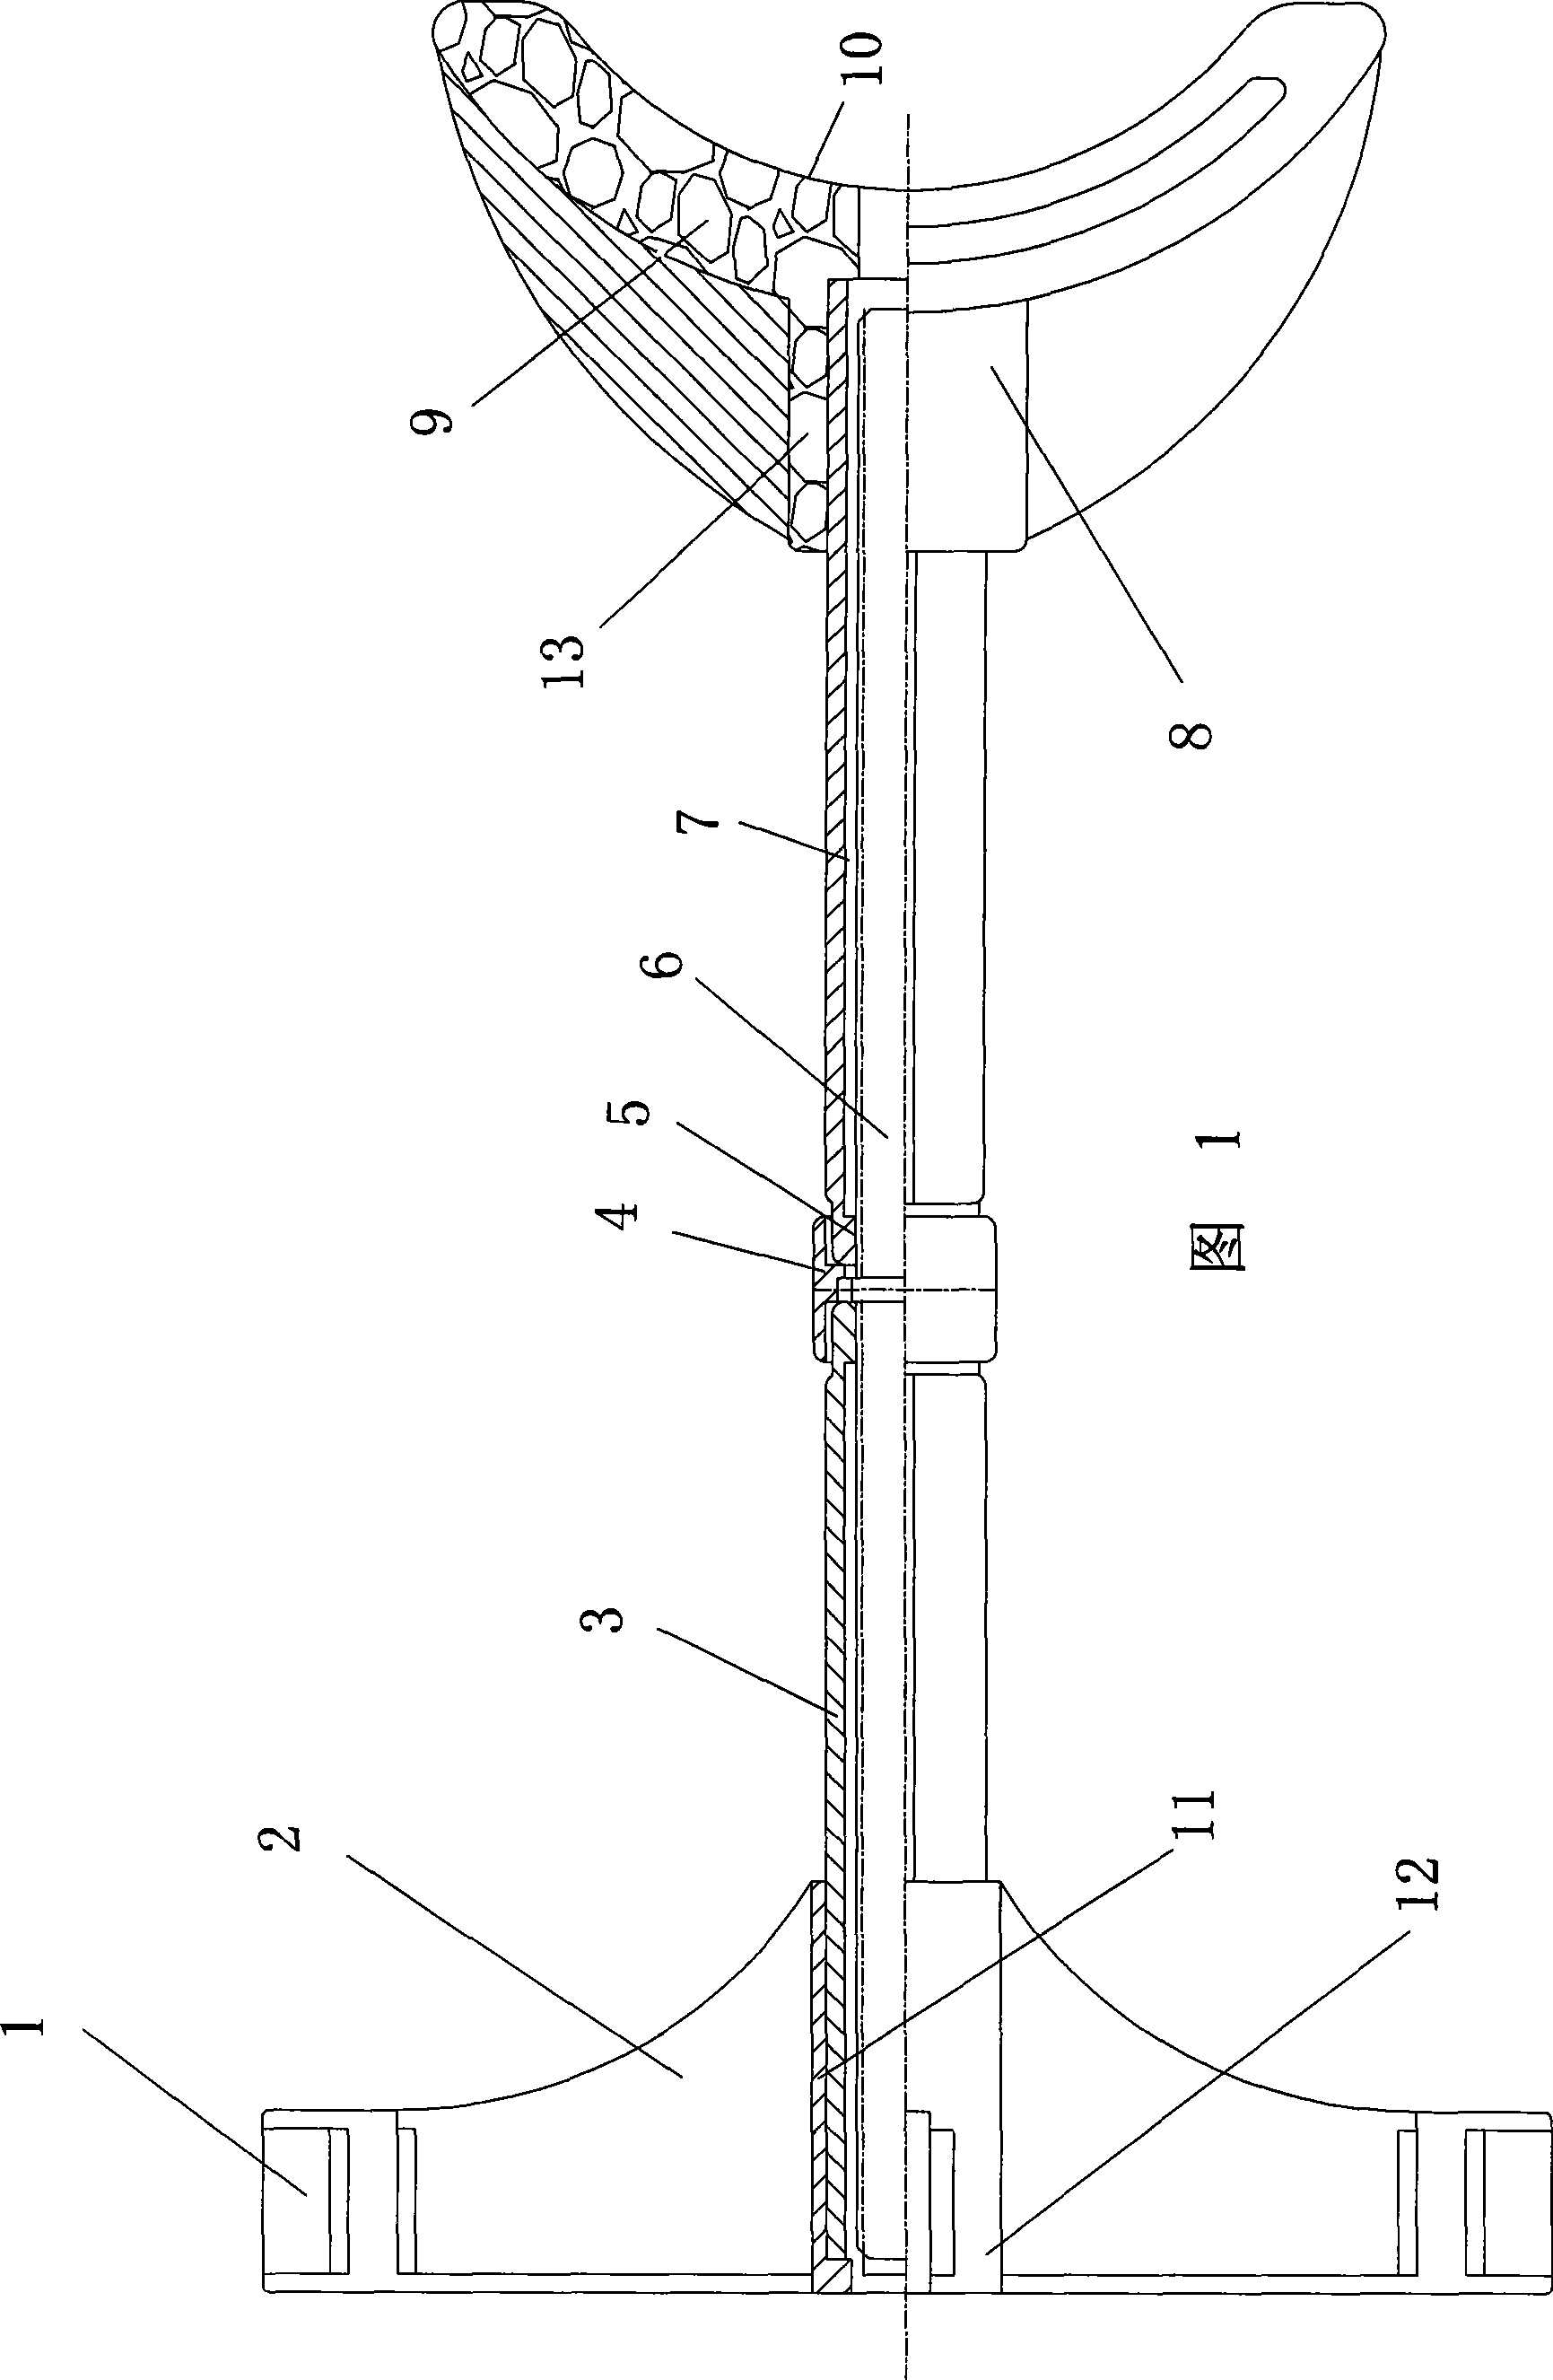 Lumbar traction treatment health-care device